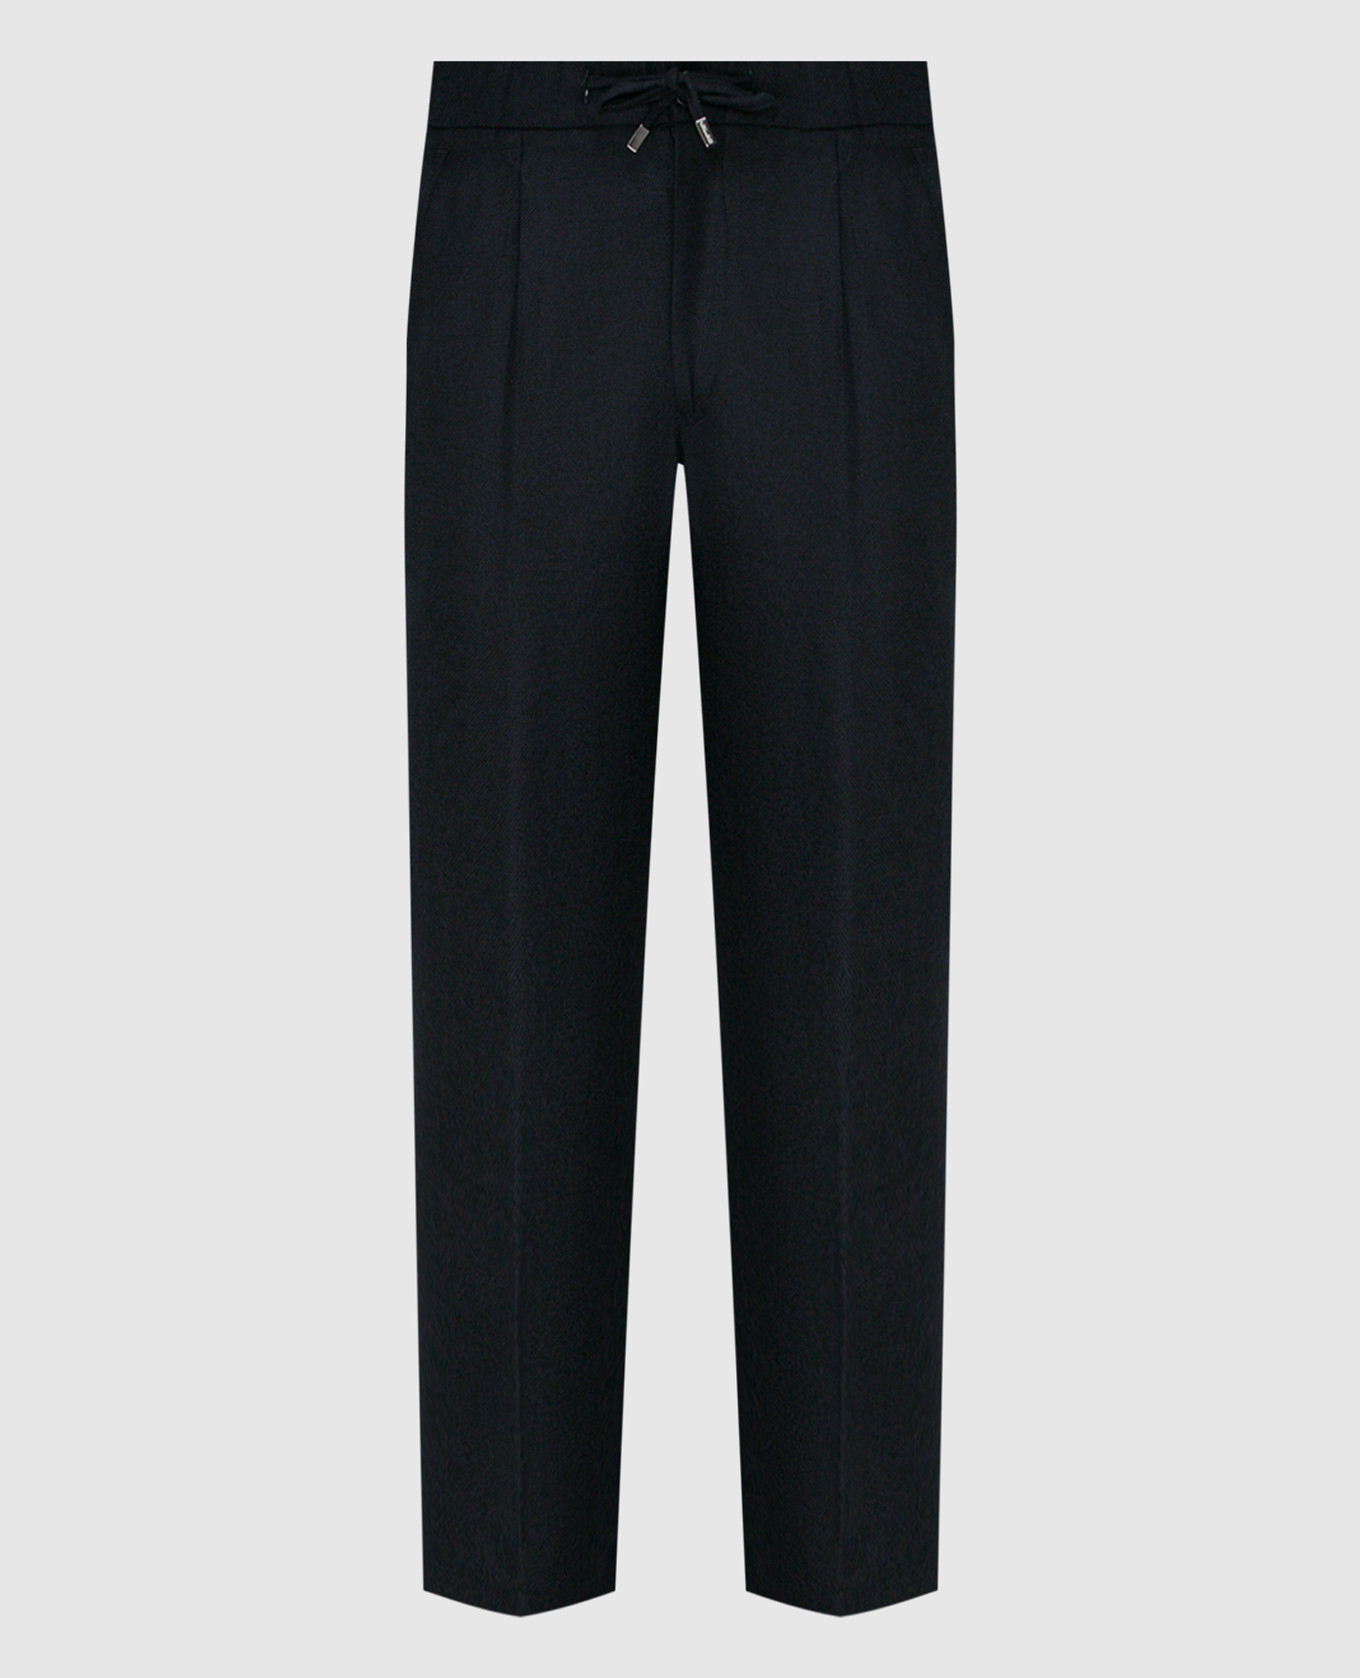 Enrico Mandelli - Blue wool and cashmere trousers GYM02B3821 - buy with ...